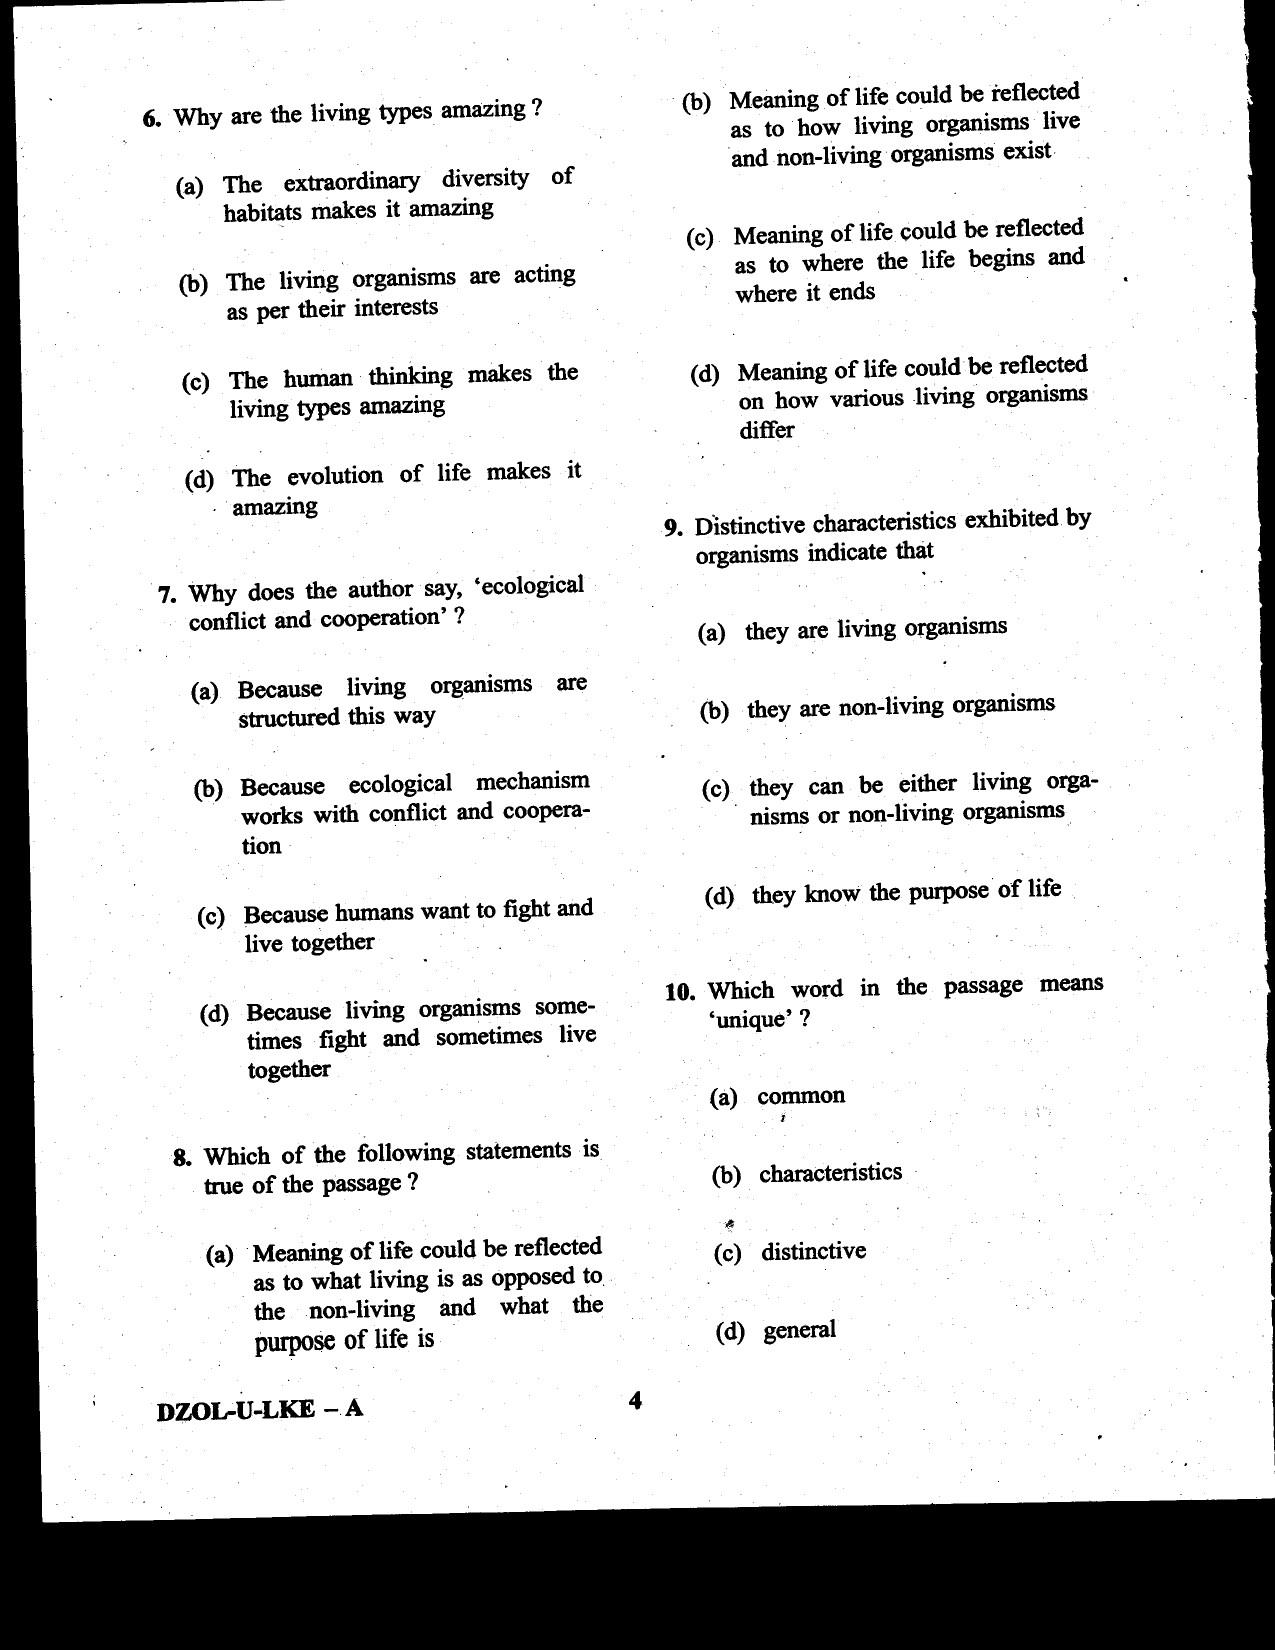 CDS II Examination 2020 English Question Paper - Image 4